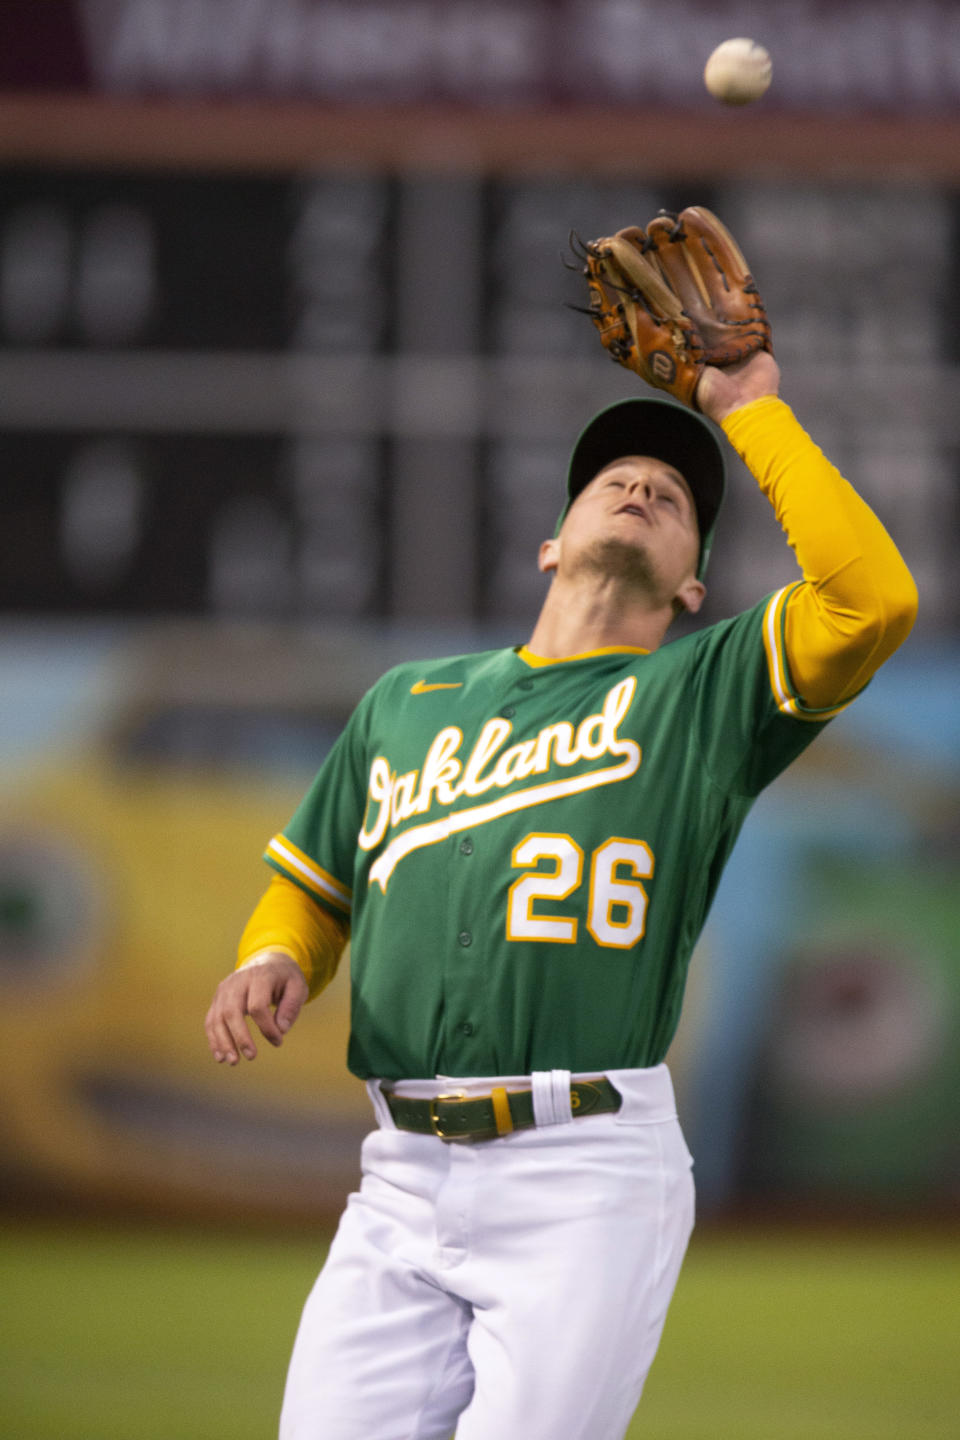 Oakland Athletics third baseman Matt Chapman catches a pop foul by Texas Rangers' Yonny Hernandez during the fifth inning of a baseball game Friday, Aug. 6, 2021, in Oakland, Calif. (AP Photo/D. Ross Cameron)